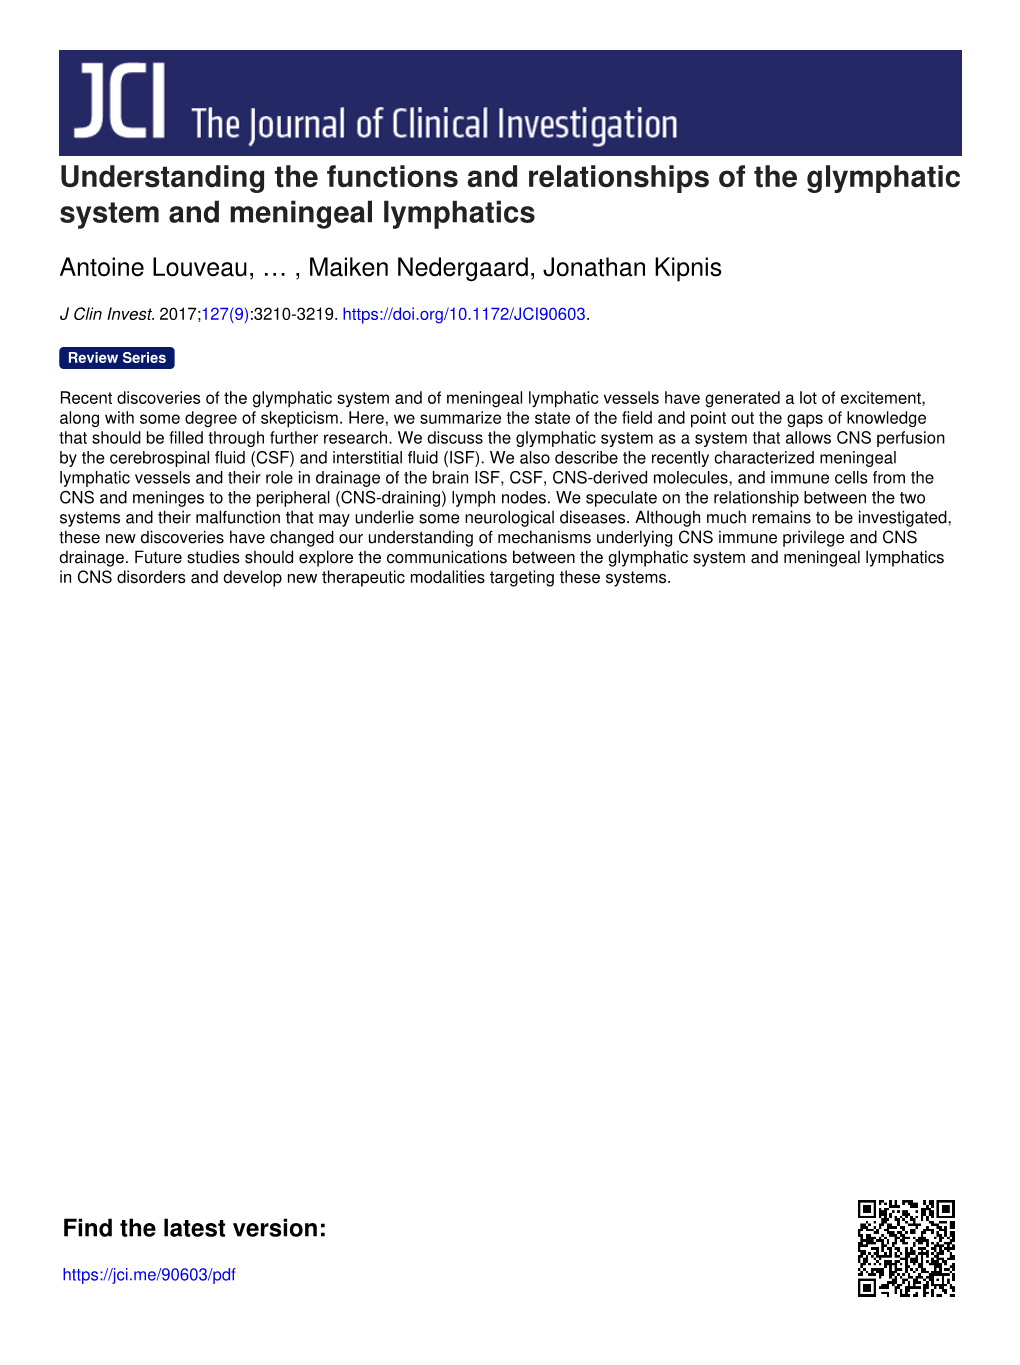 Understanding the Functions and Relationships of the Glymphatic System and Meningeal Lymphatics